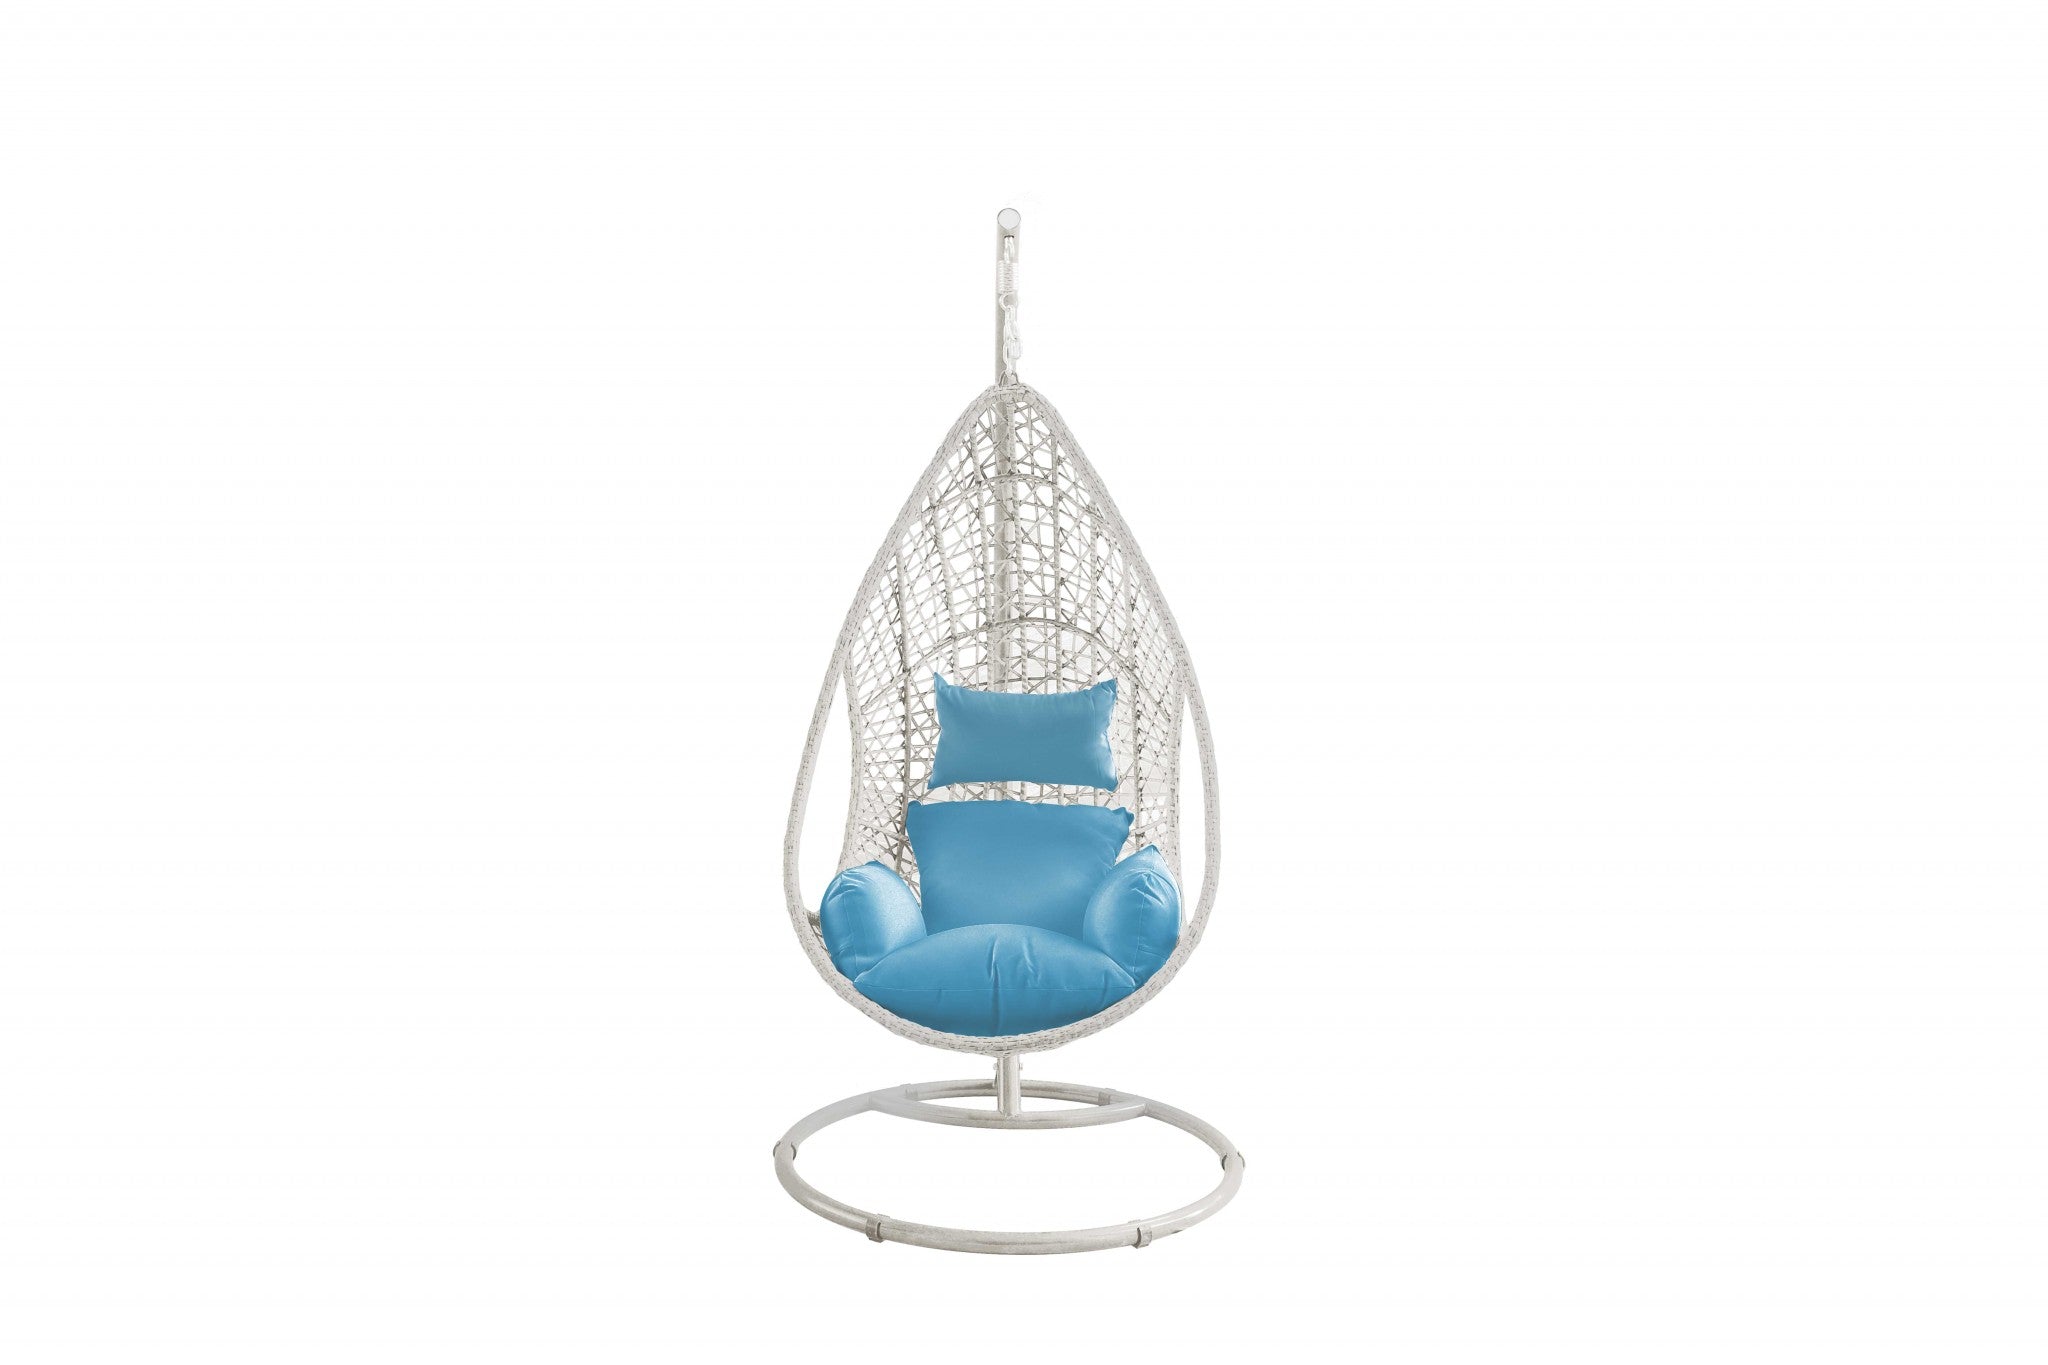 Blue-And-White-Metal-Swing-Chair-With-Cushion-Outdoor-Chairs